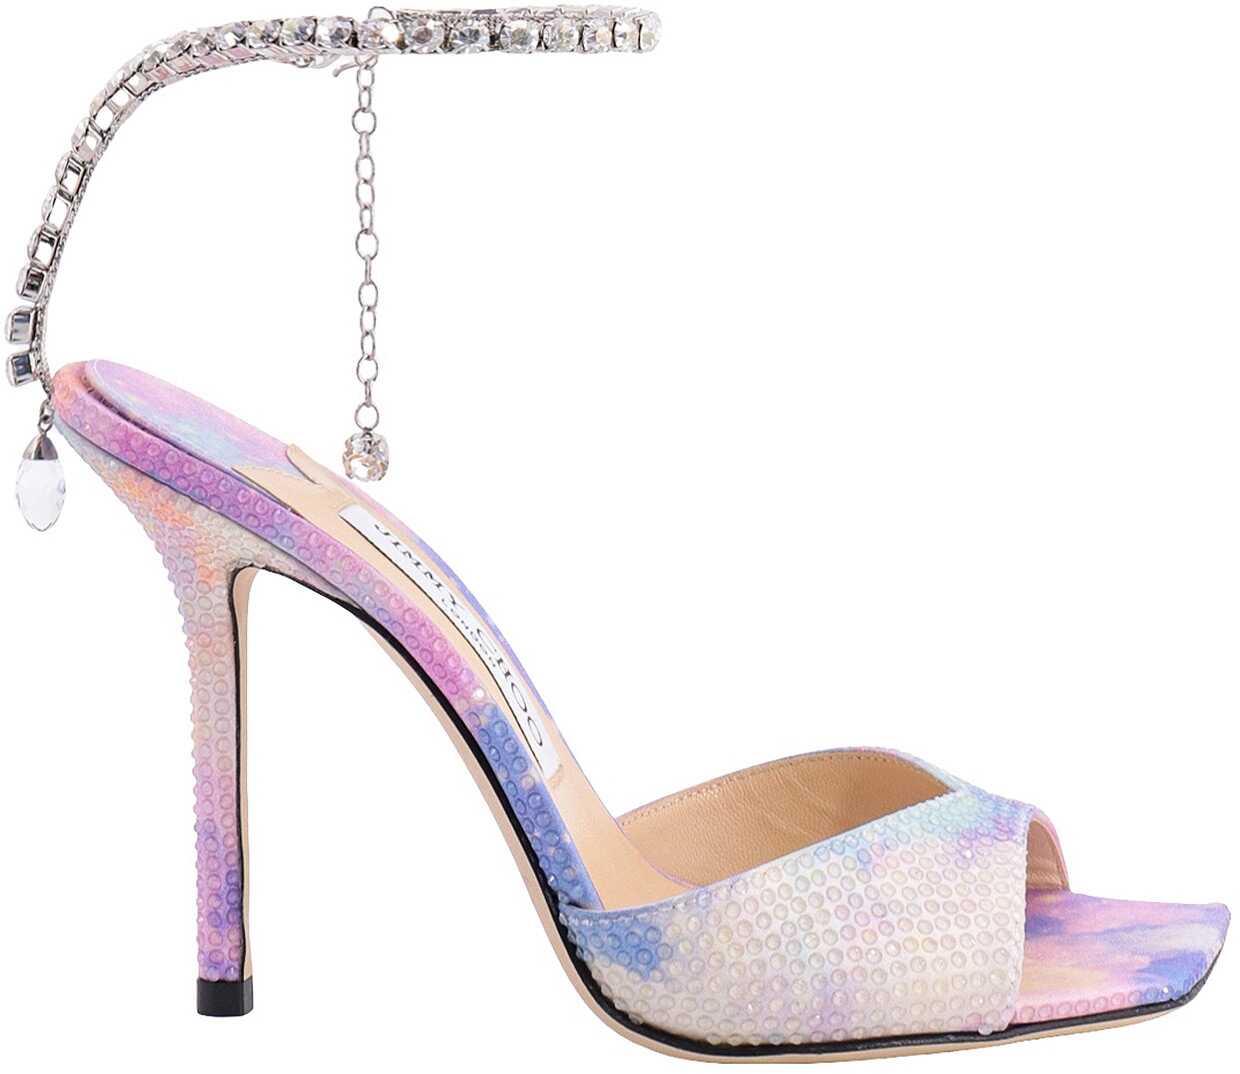 Jimmy Choo Other Materials Sandals MULTICOLOR